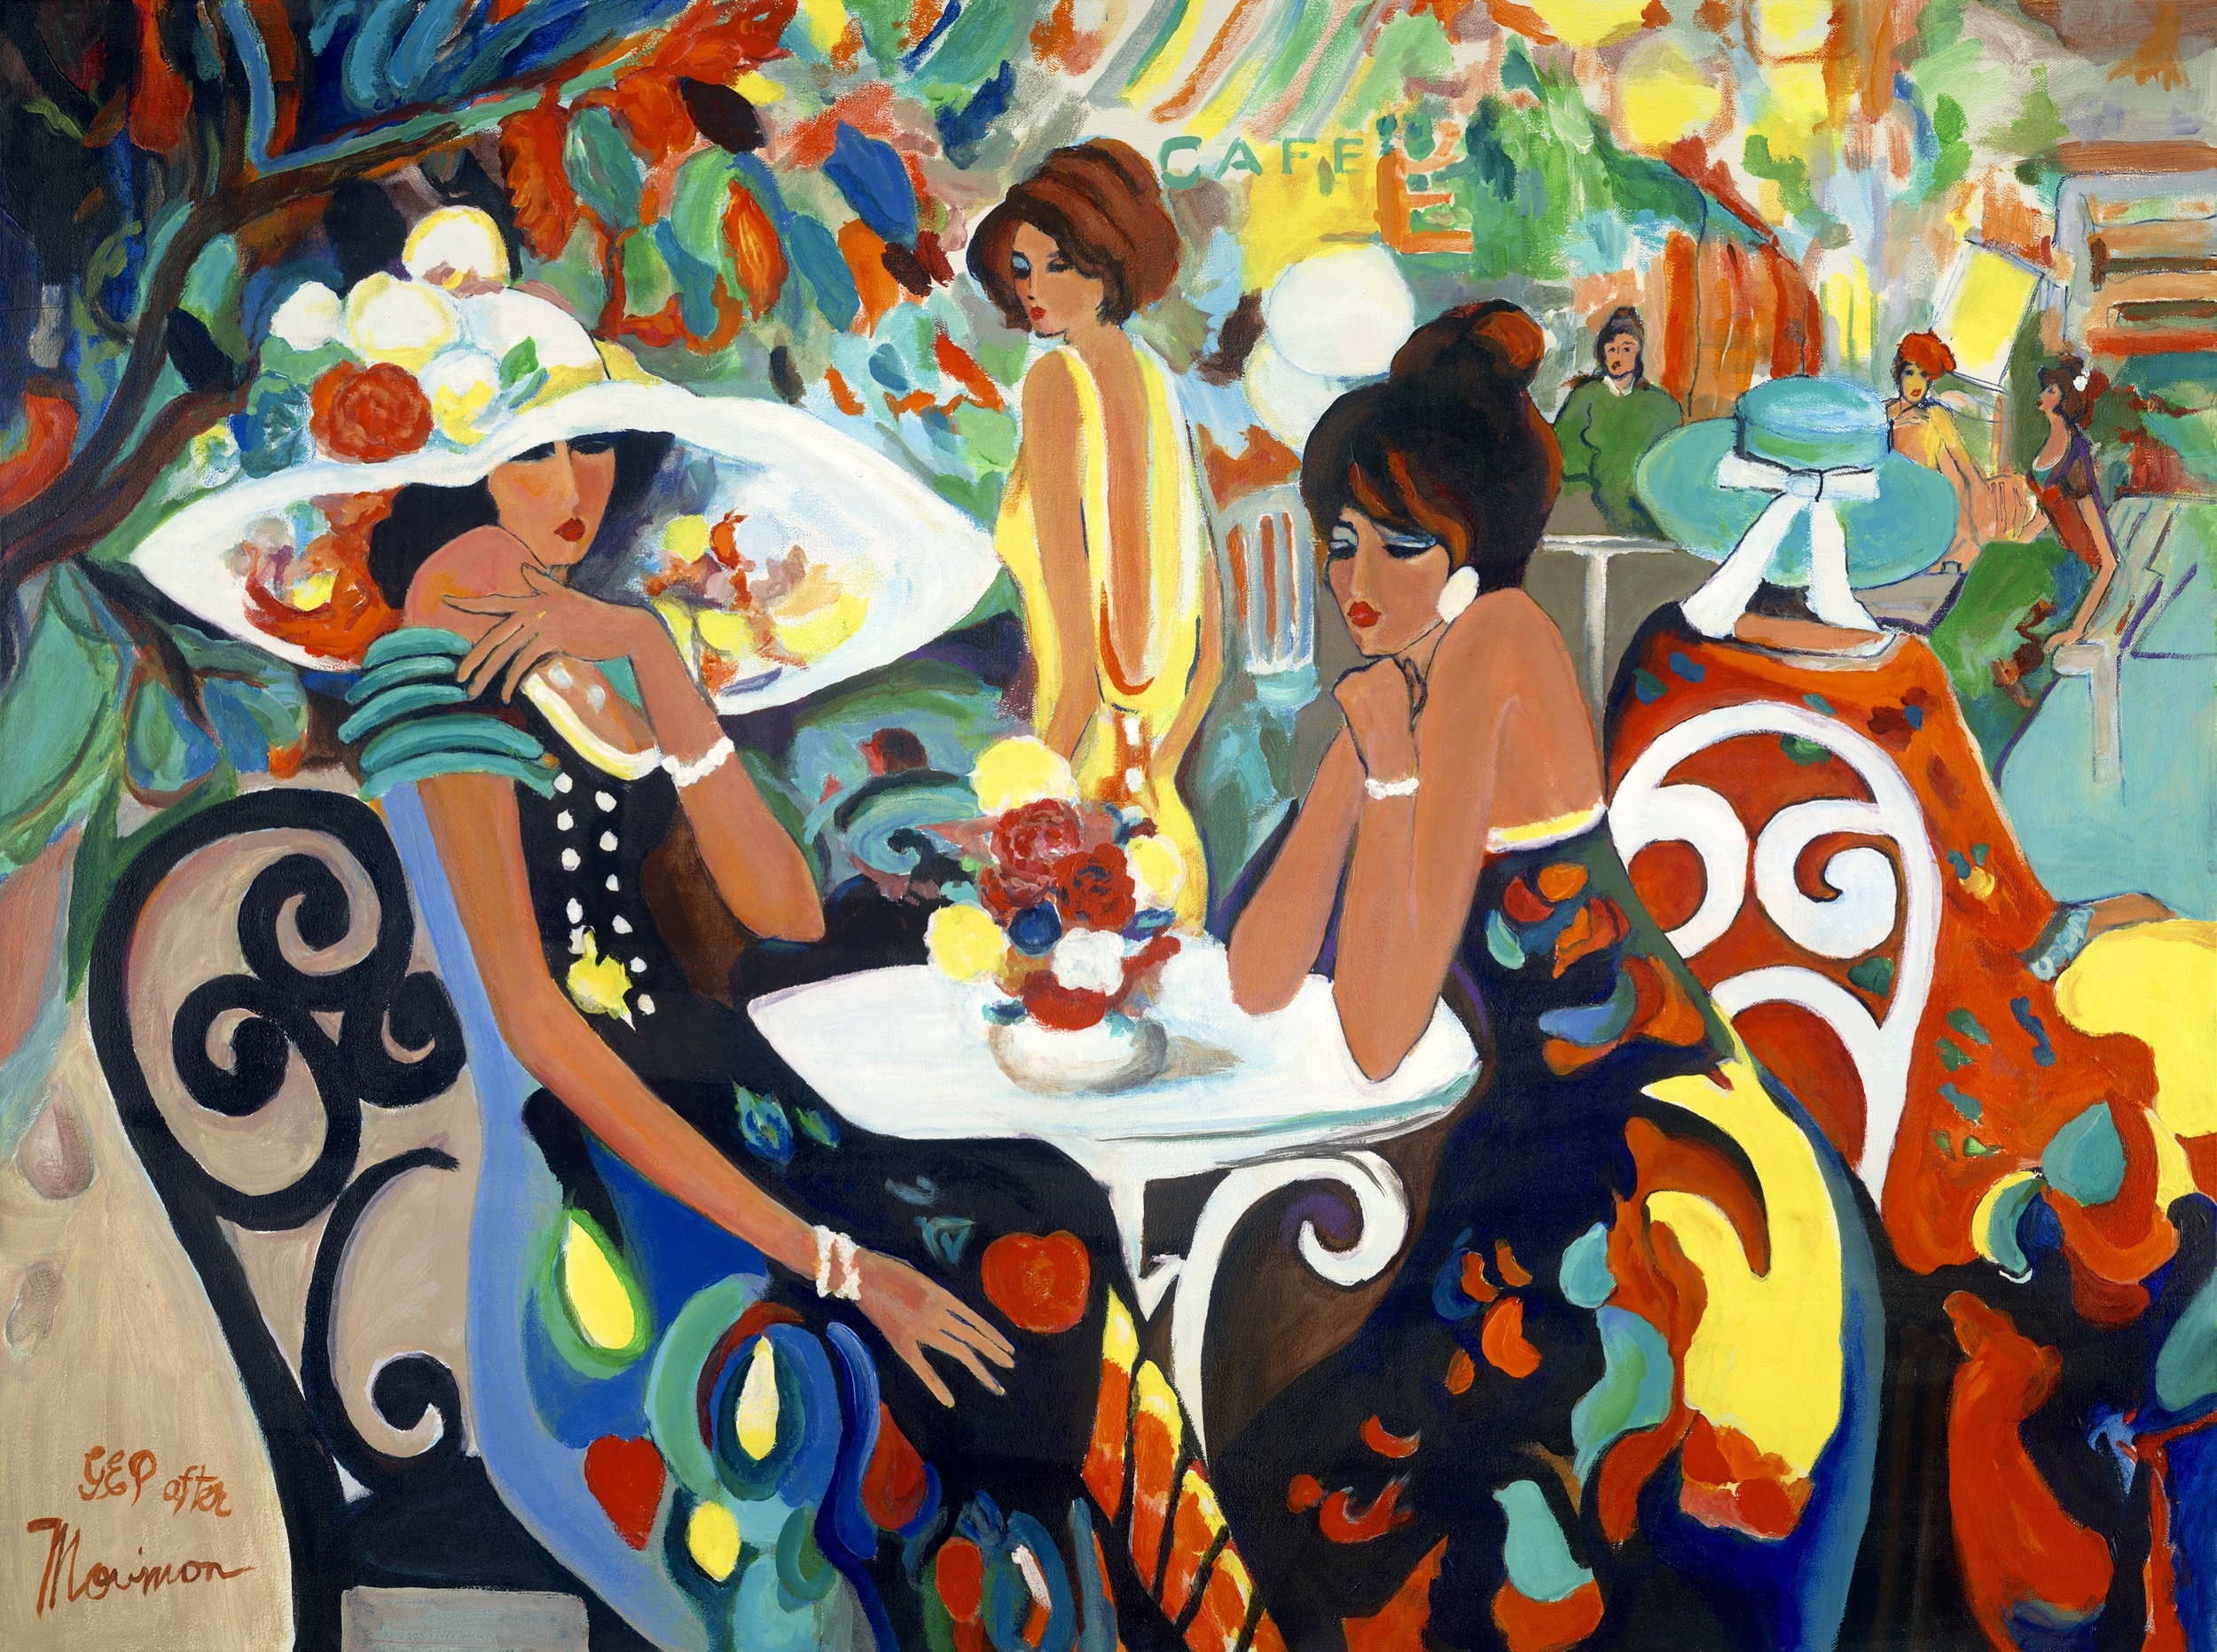 parisienne cafe study by George Porter after Maimon